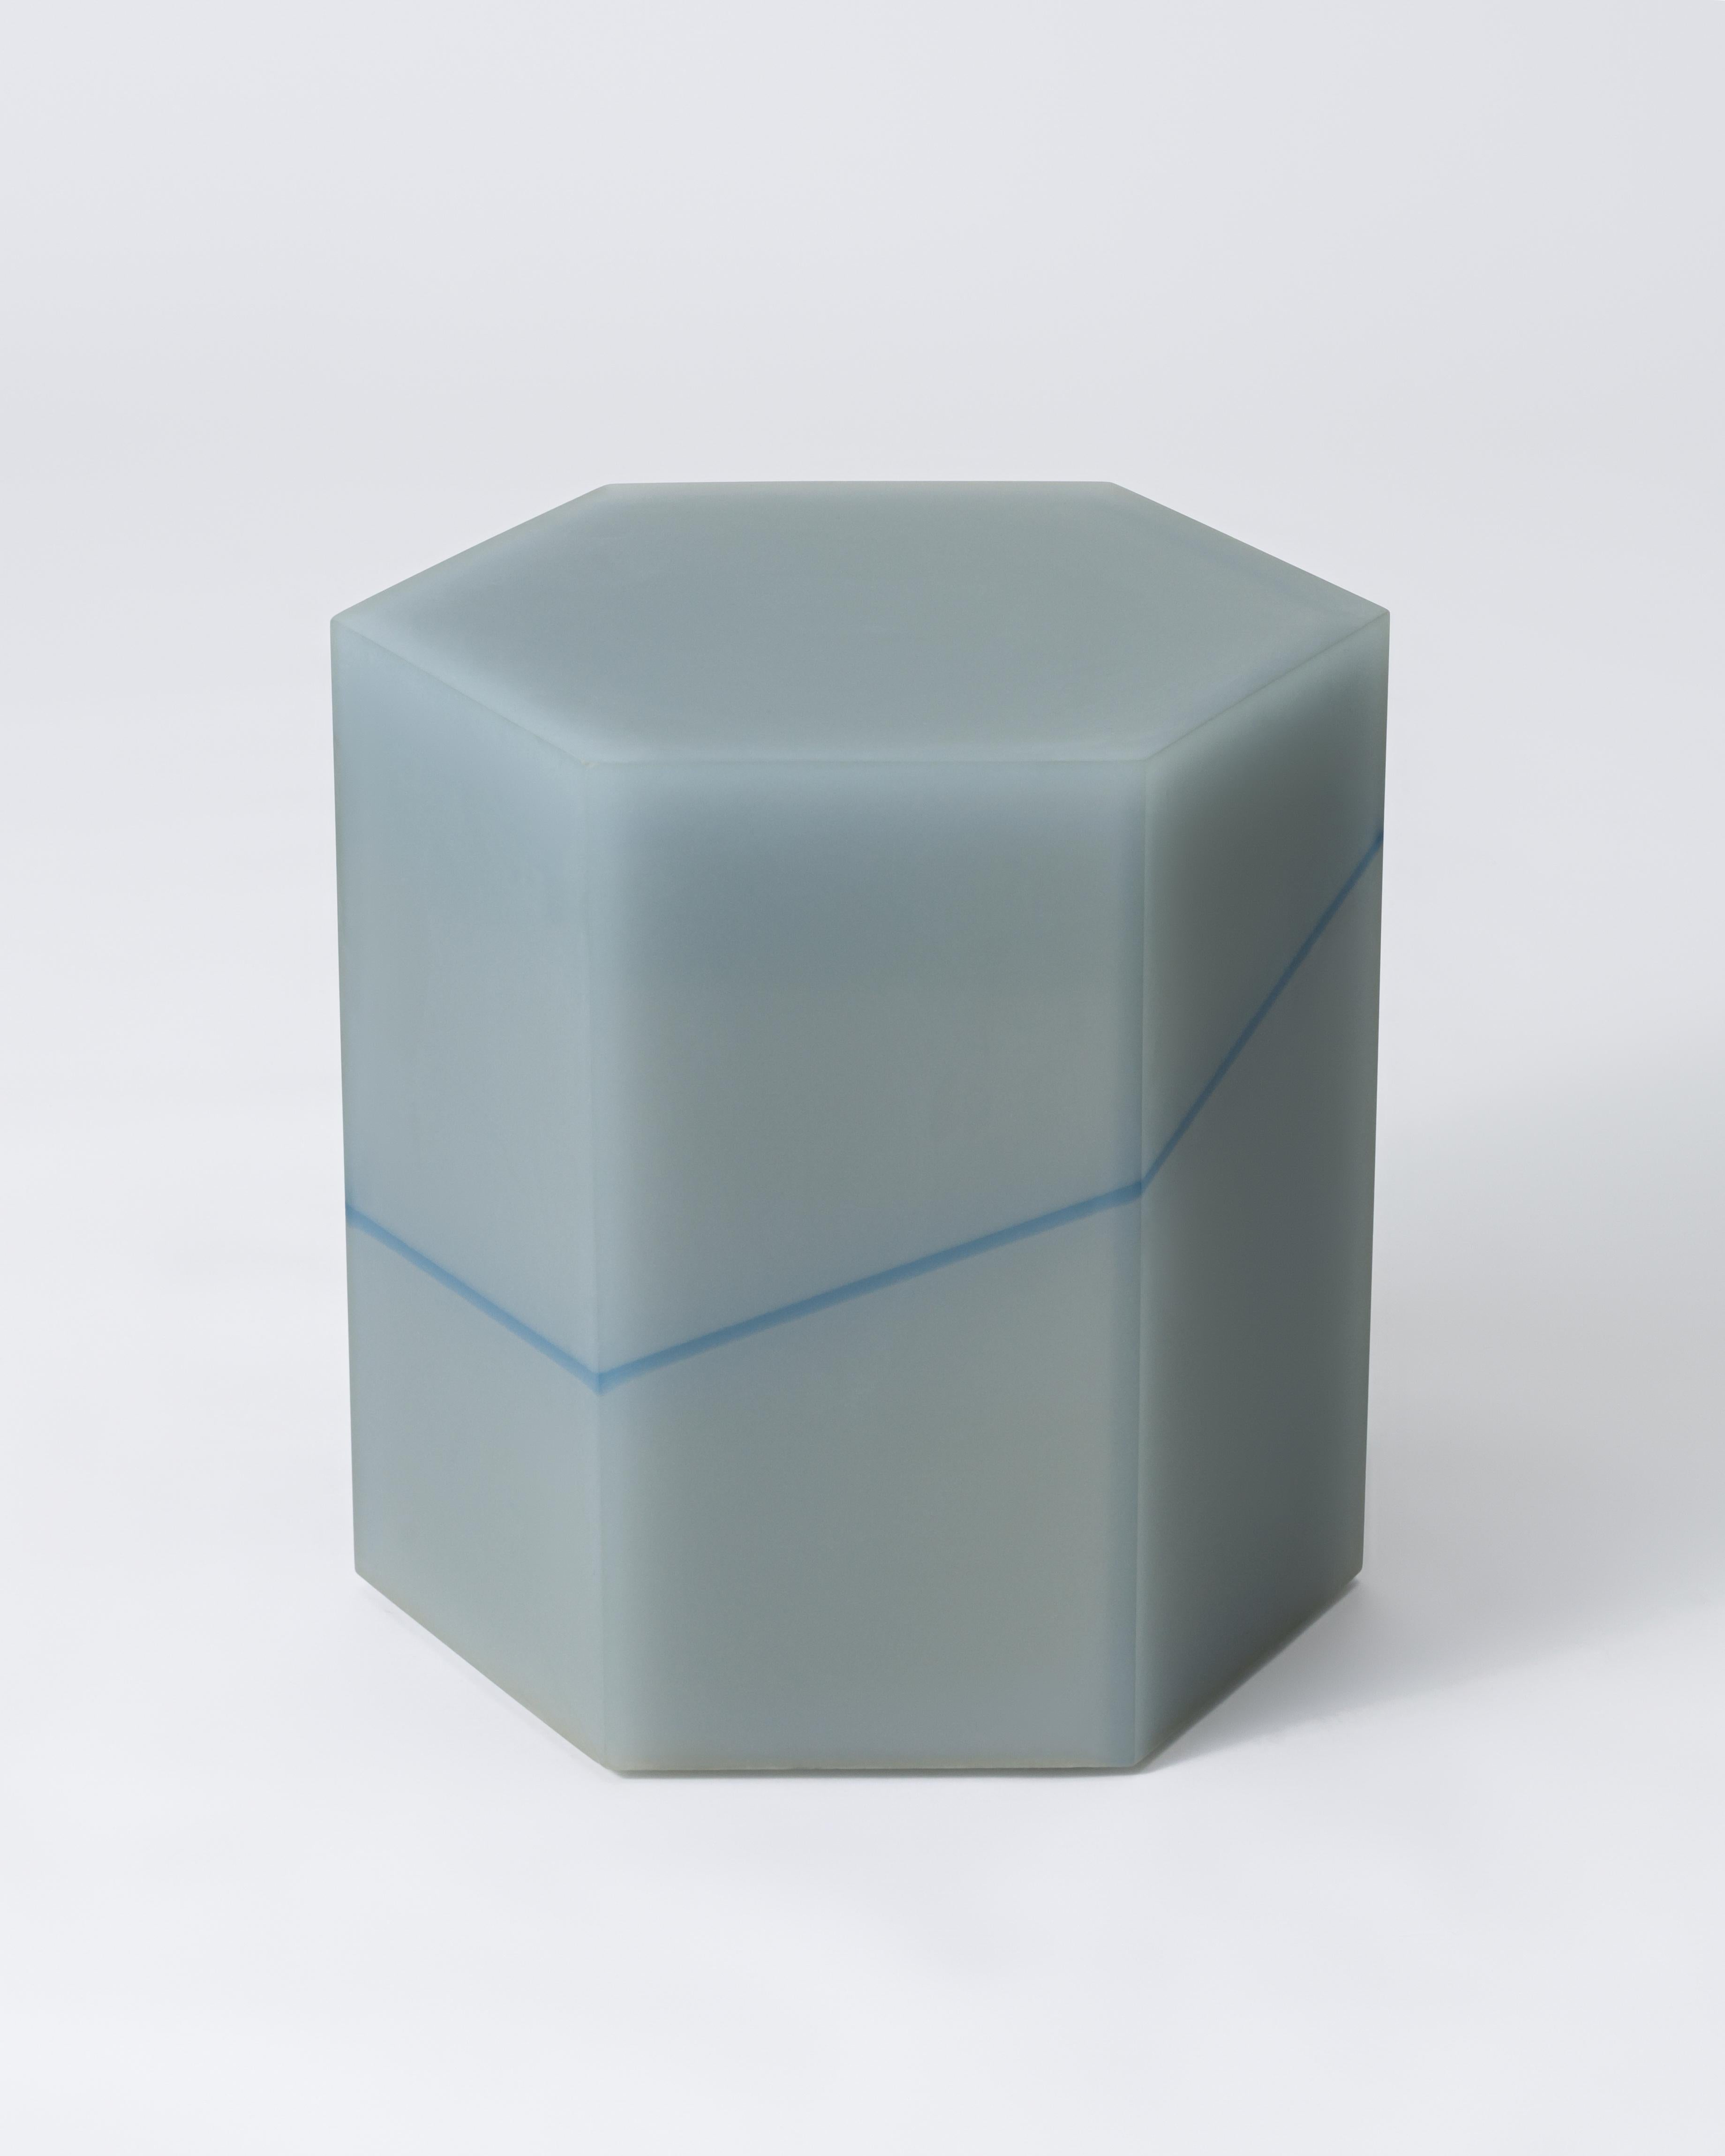 This ombre resin side table by Facture Studio goes beyond a simple accent piece to make a commanding statement. Hexagonal in shape, it is meticulously crafted from five layers of ascending color saturation, gradually shifting from dark to light in a